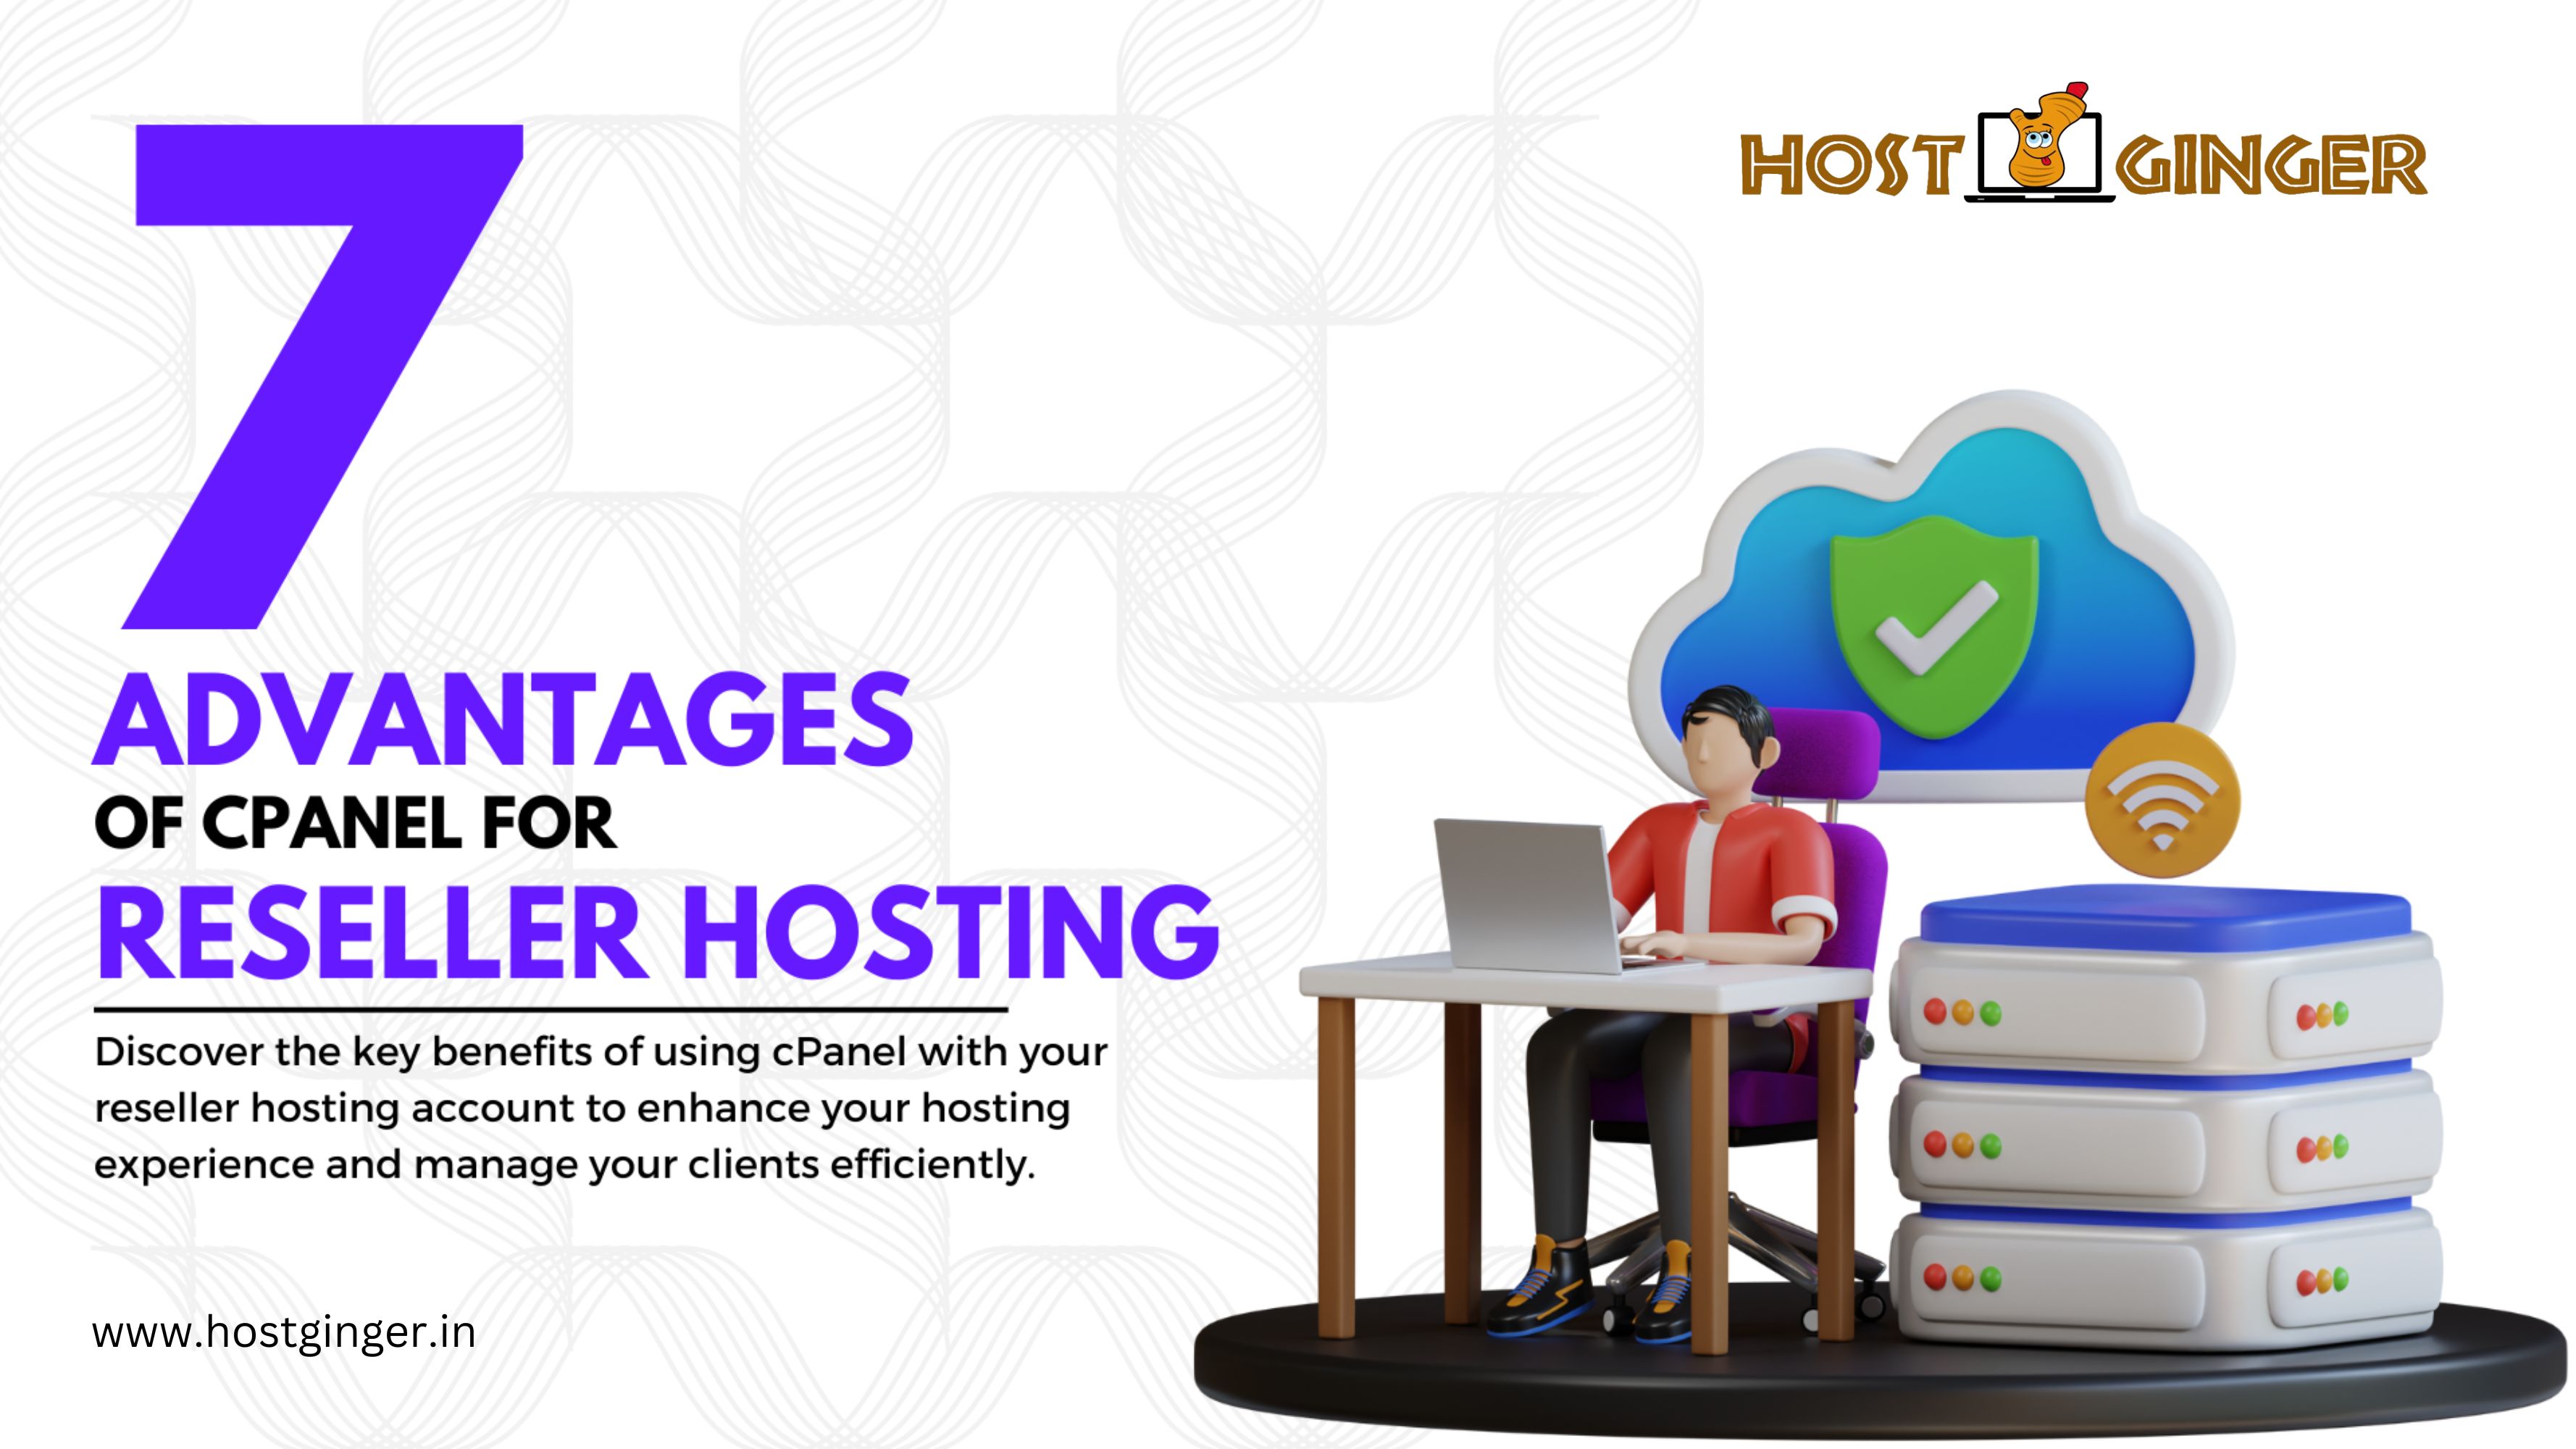 Top 7 Advantages of cPanel for Reseller Hosting